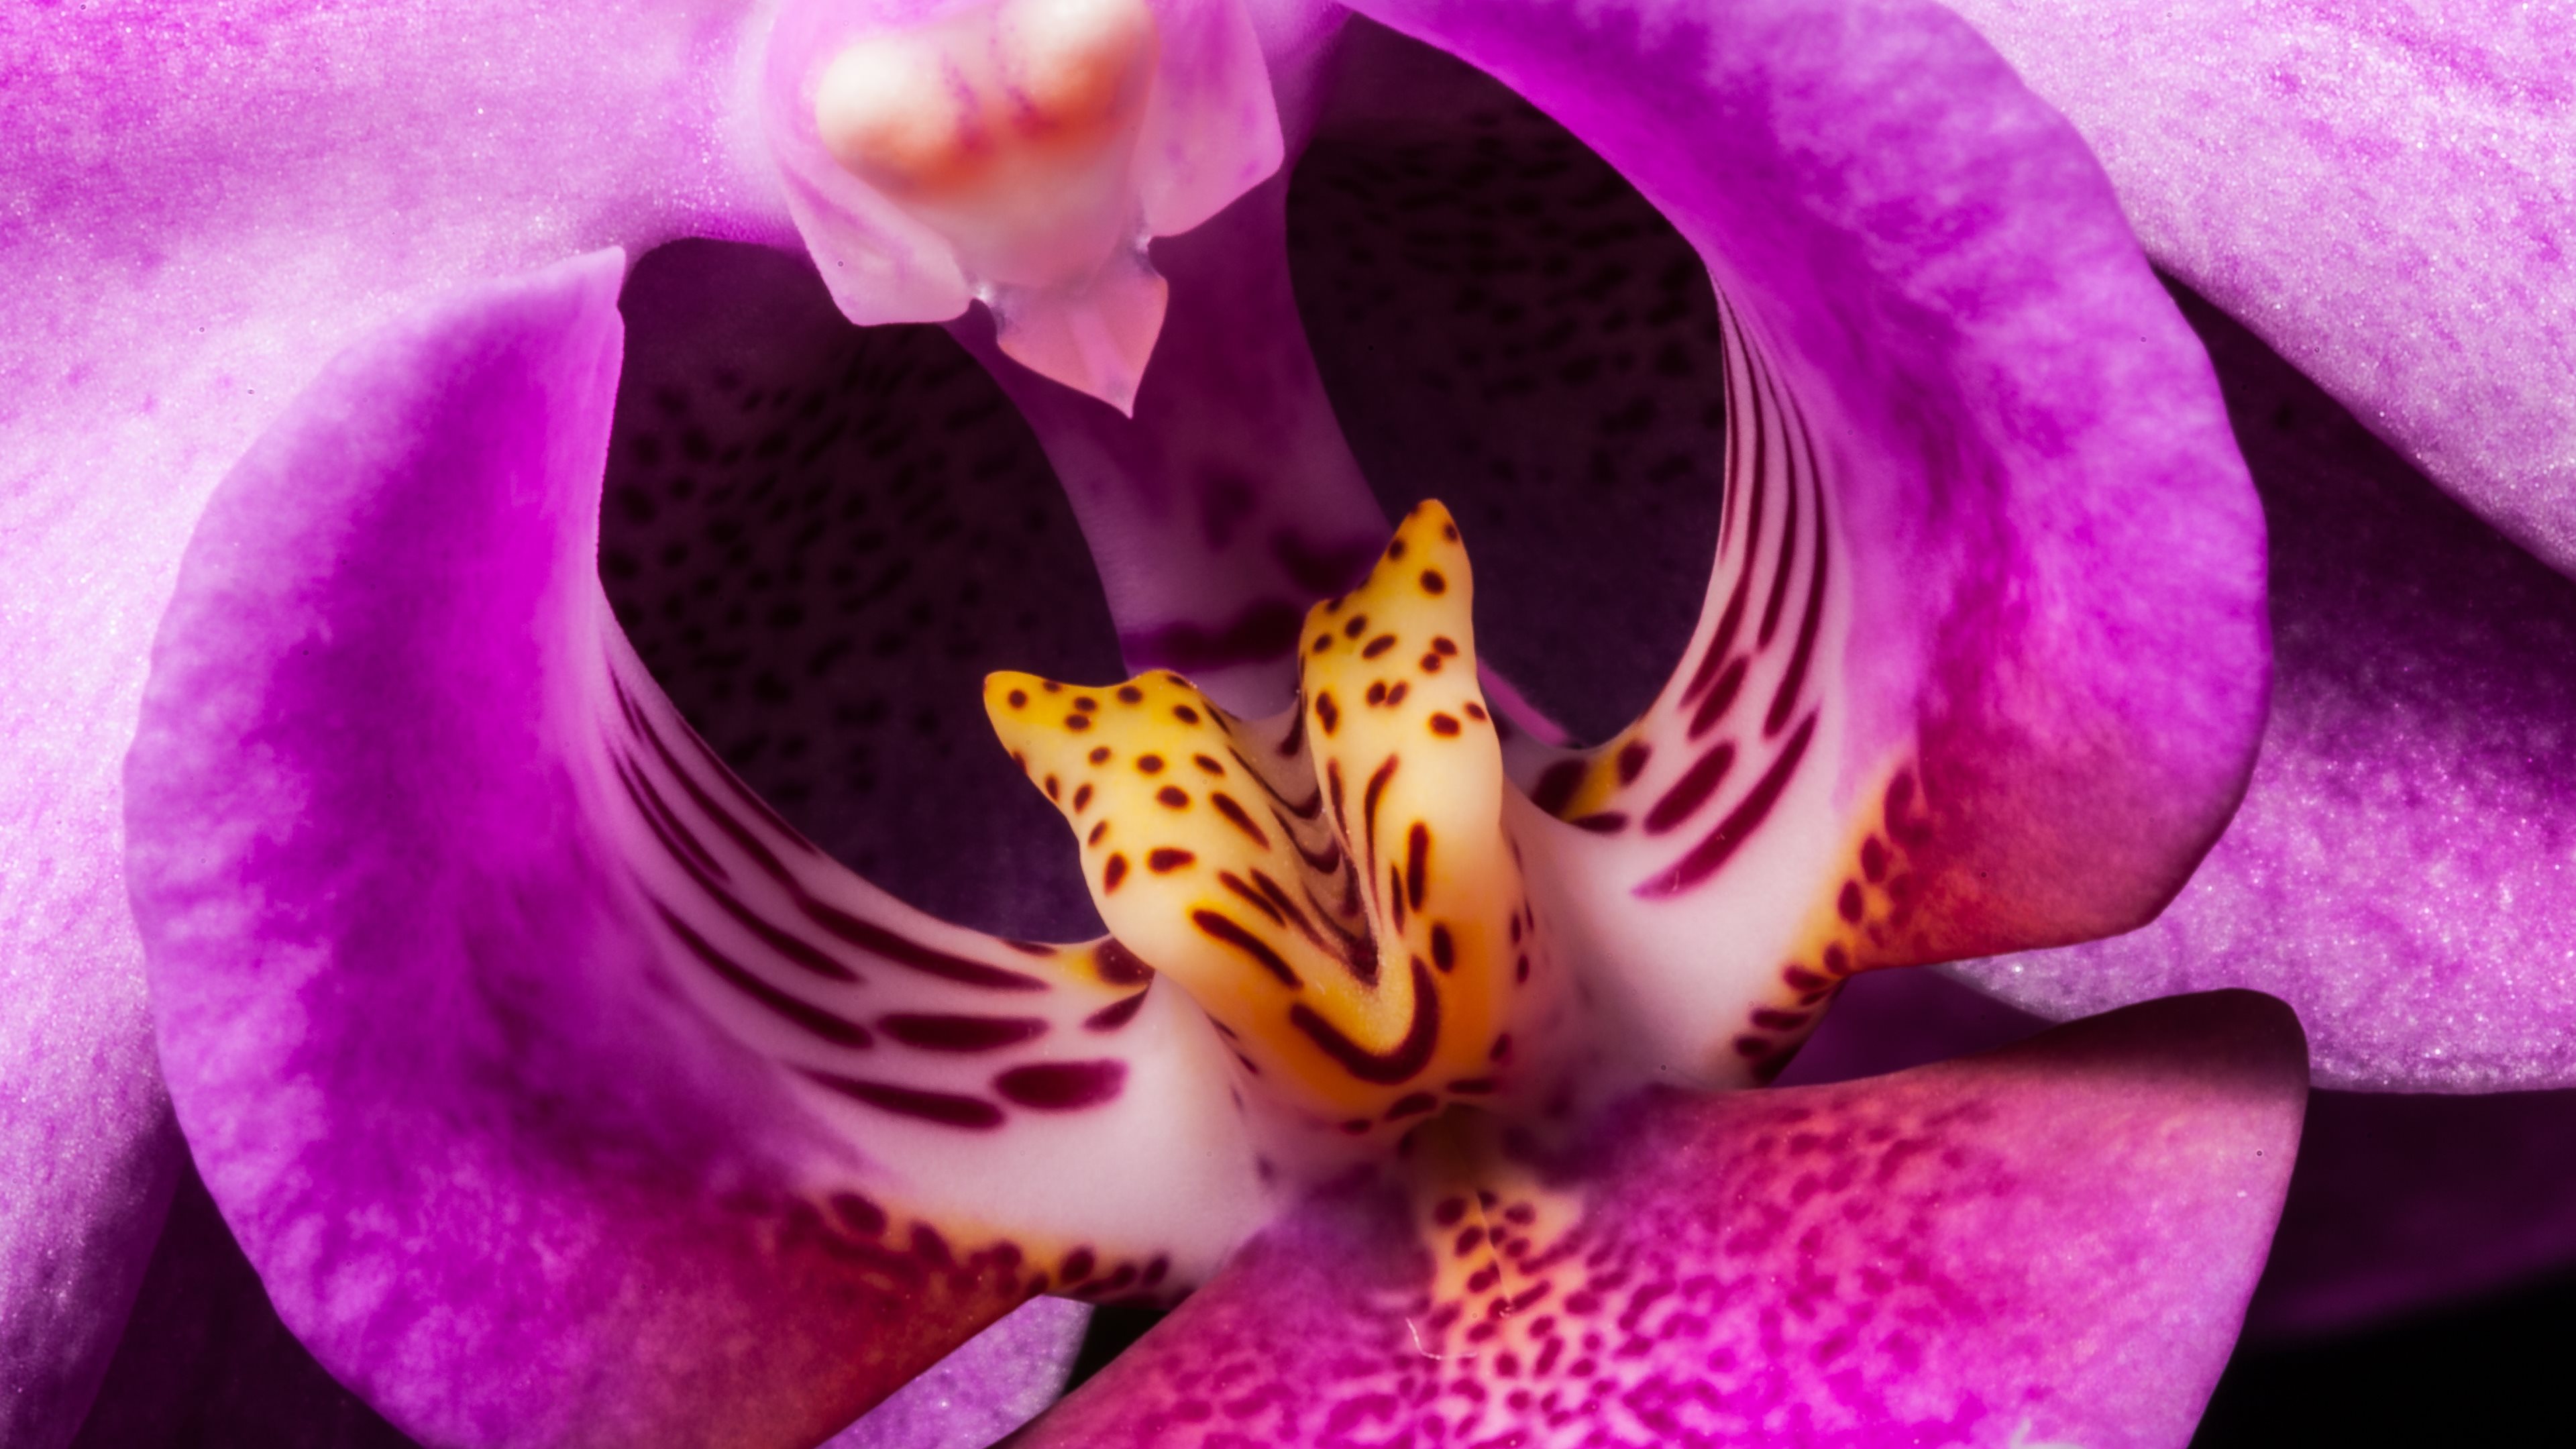 Earth Orchid 3840x2160